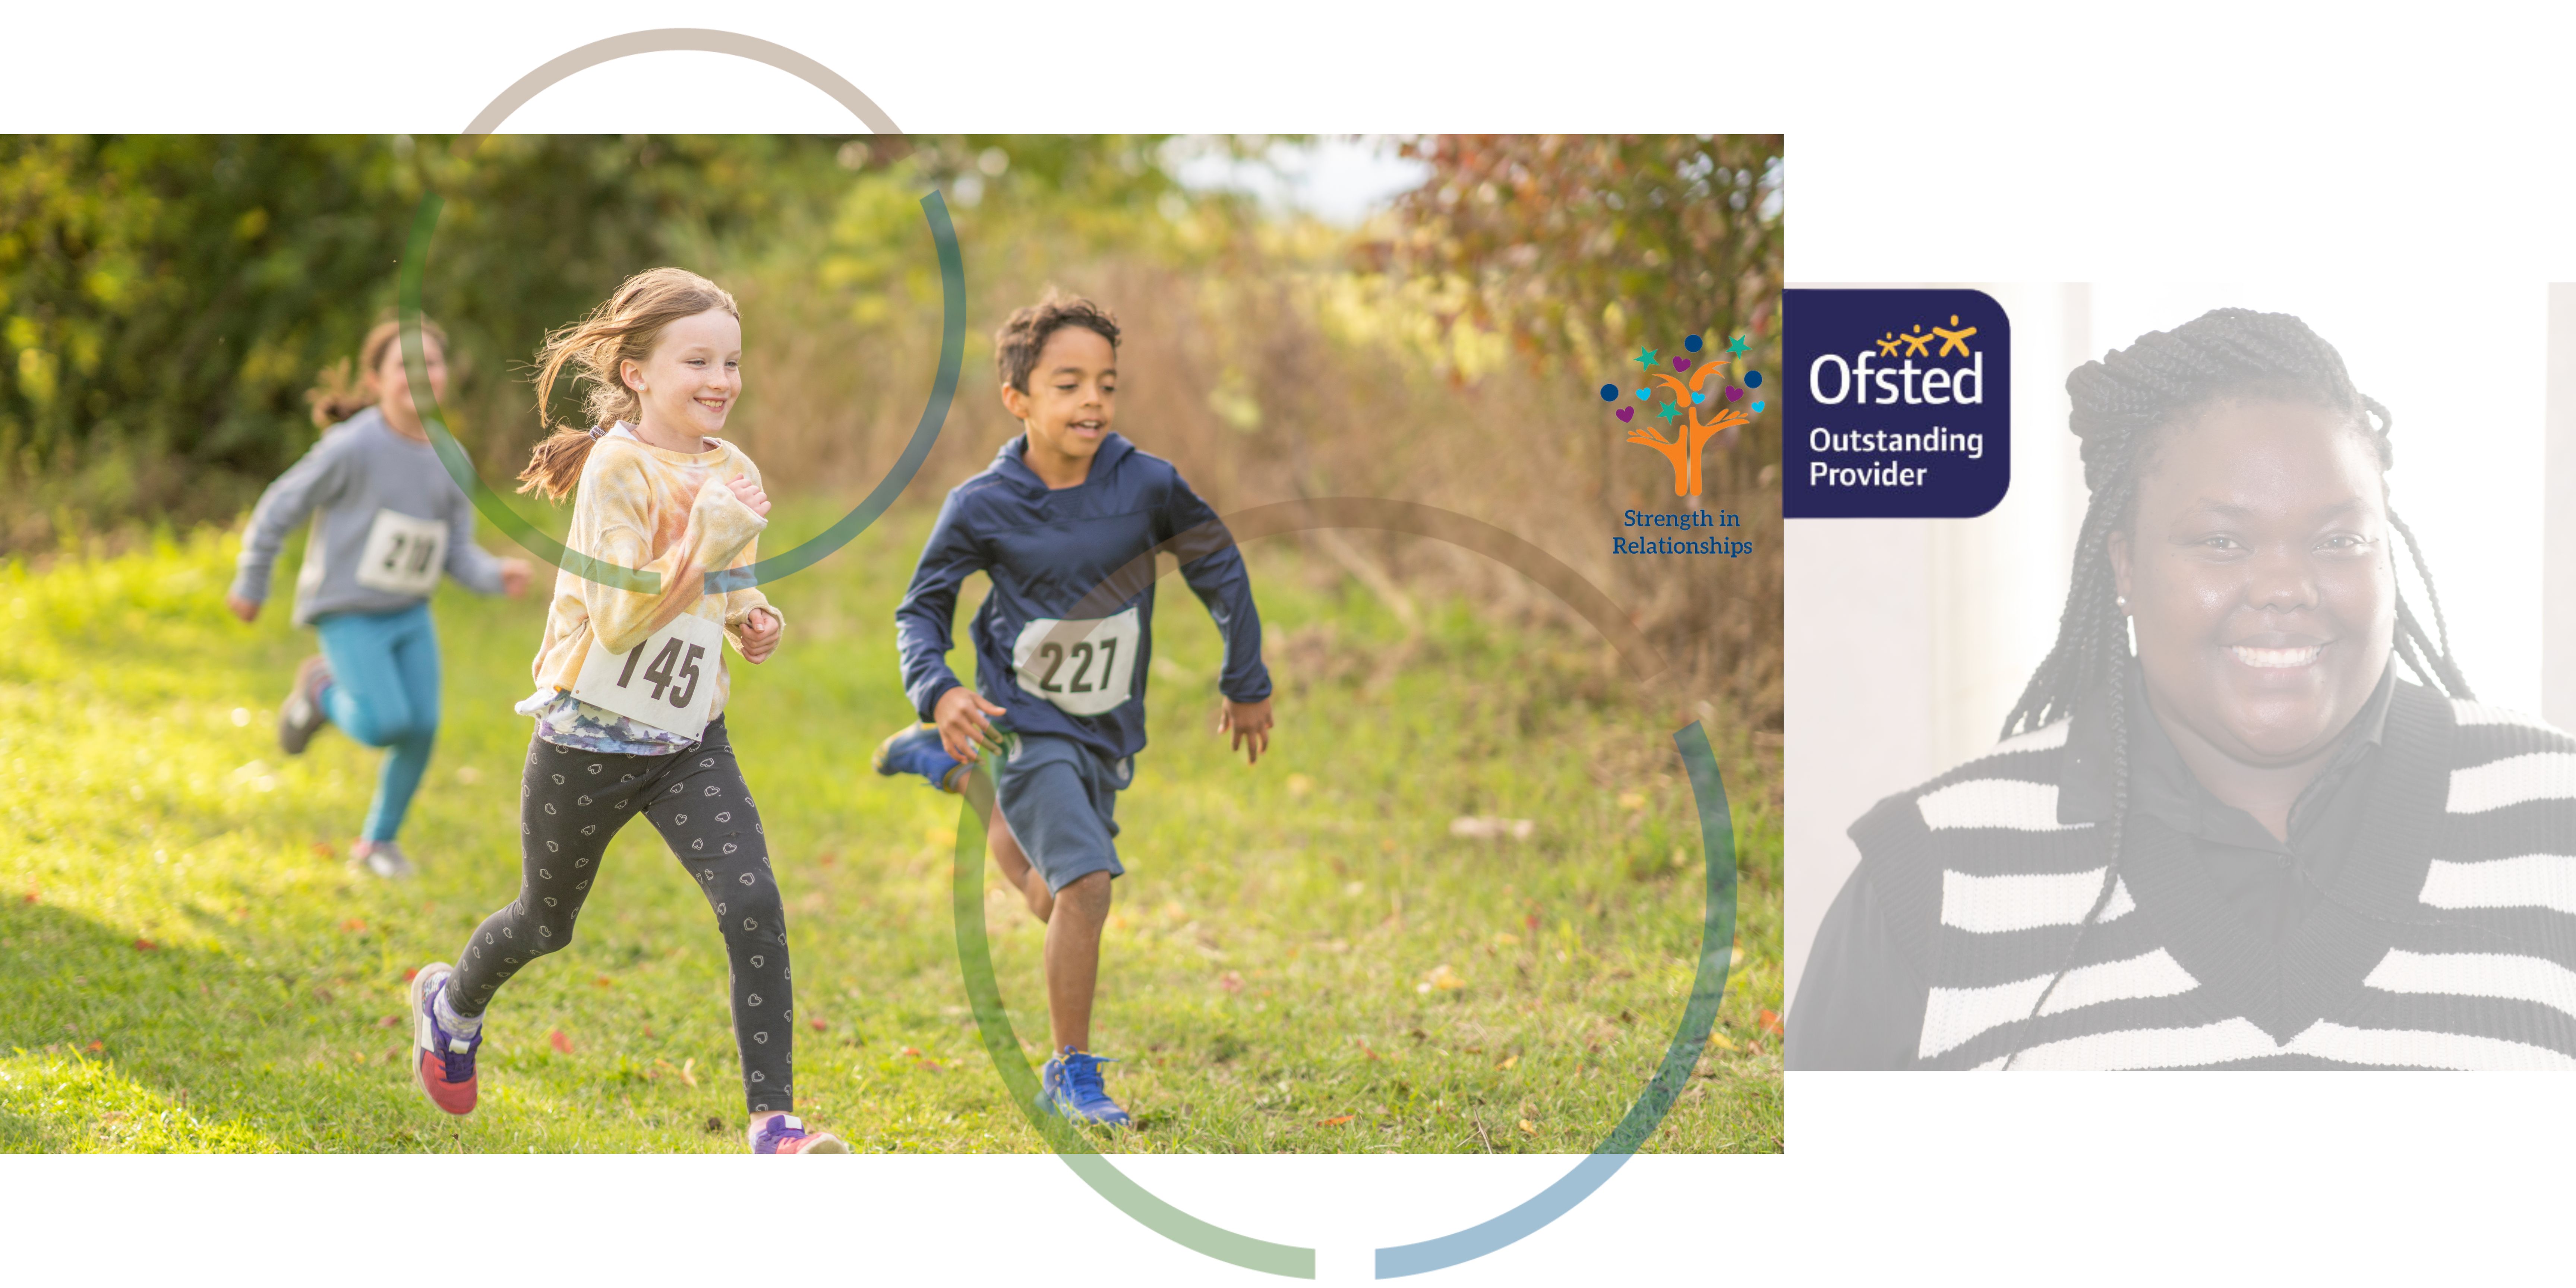 An image of children running in a race next to a portrait photograph of a member of the children and families social work team with the Ofsted and strength in partnerships logos.